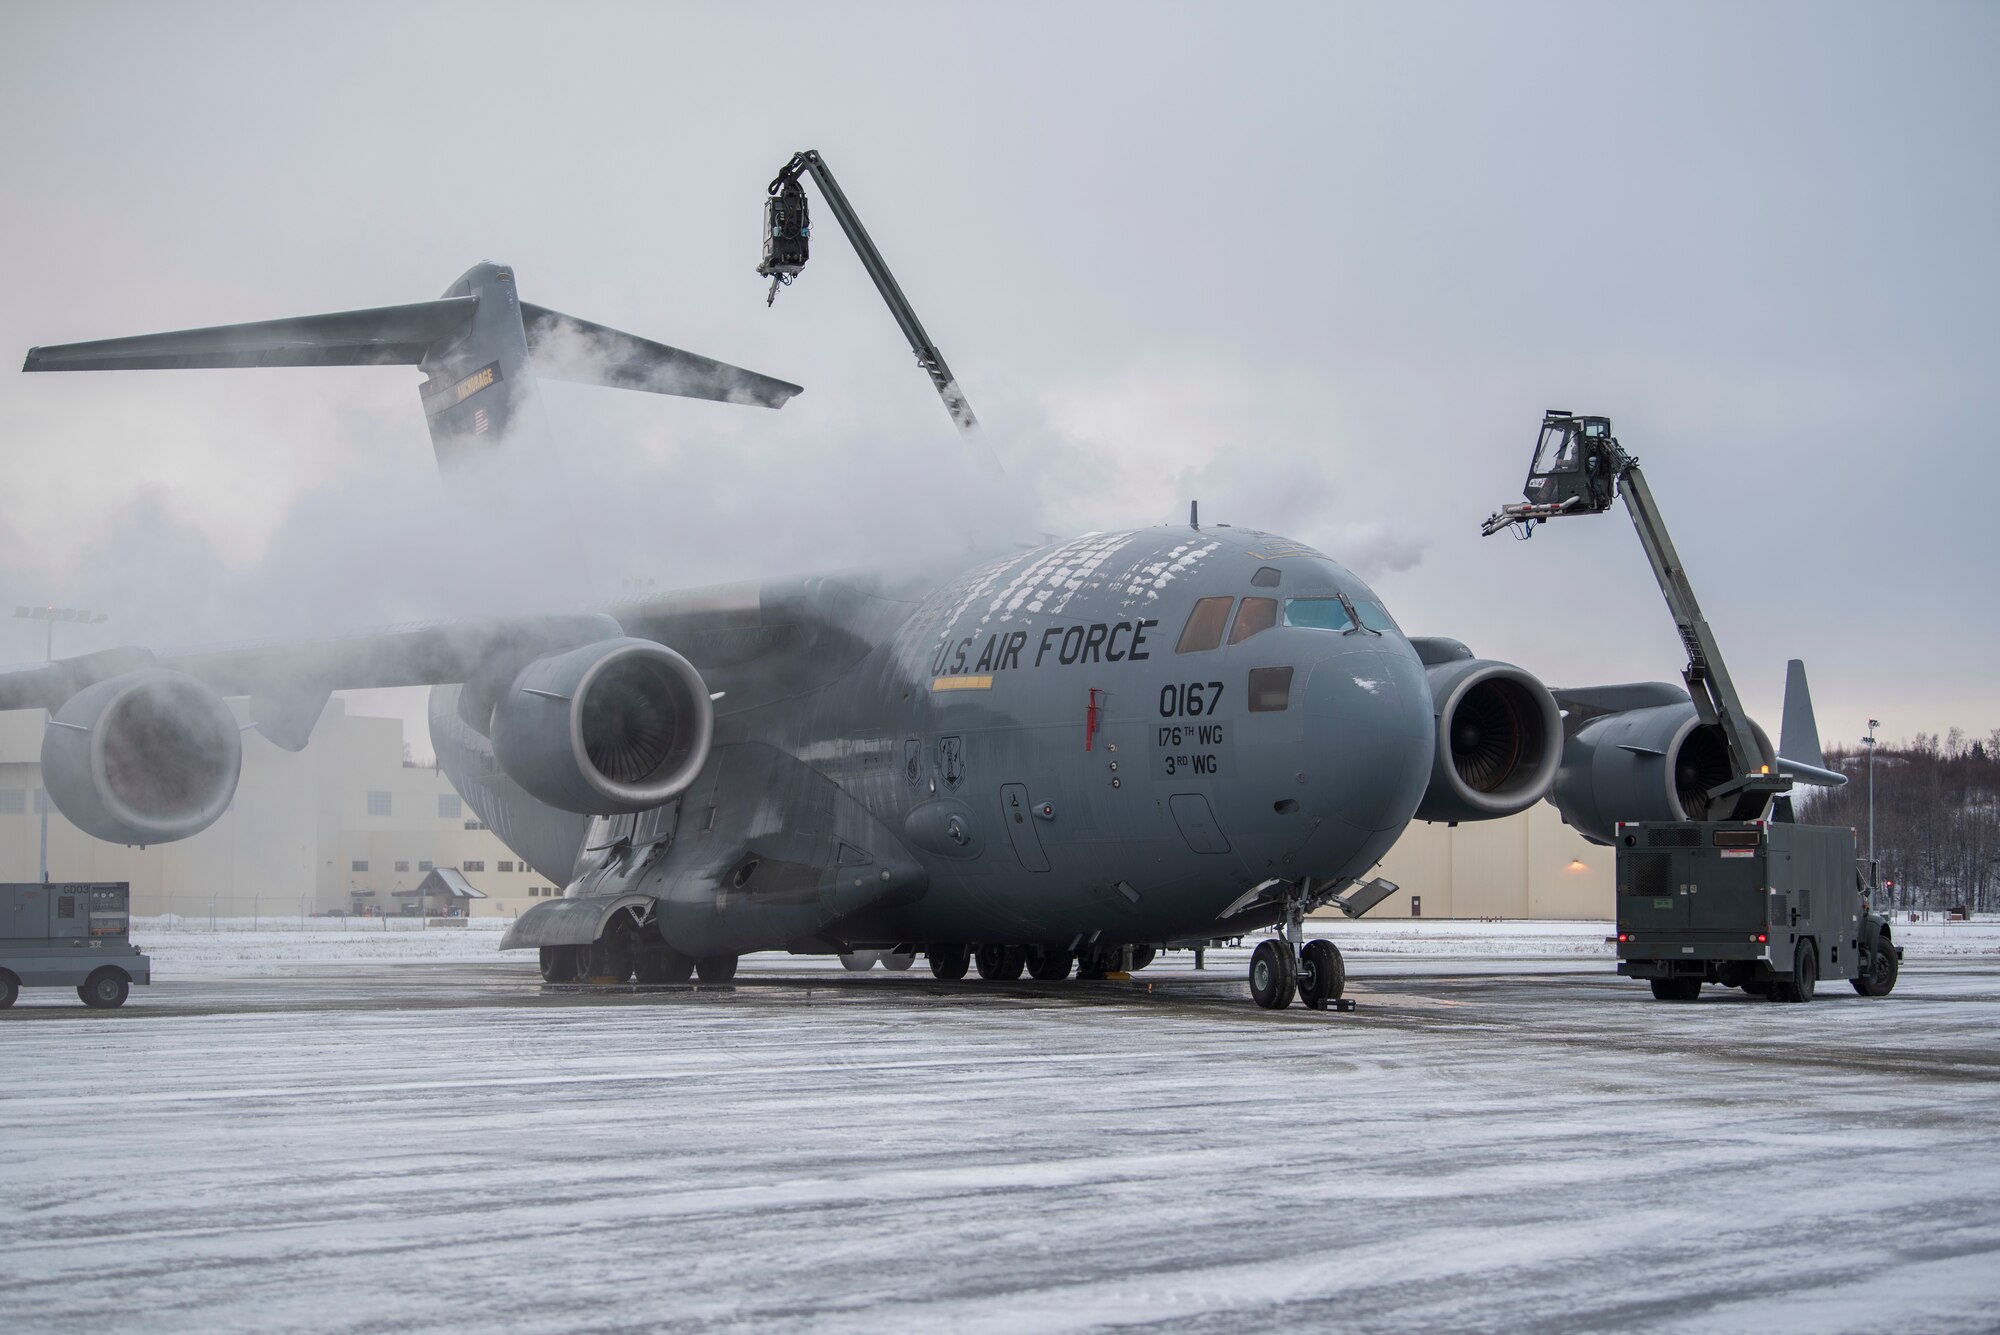 U.S. Air Force Airmen with the 732nd Aircraft Mobility Squadron deices a C-17 Globemaster III at Joint Base Elmendorf-Richardson, Alaska, Dec. 1, 2018. JBER mission operations continue following a 7.0 earthquake hit to Anchorage, Alaska, on Nov. 30.